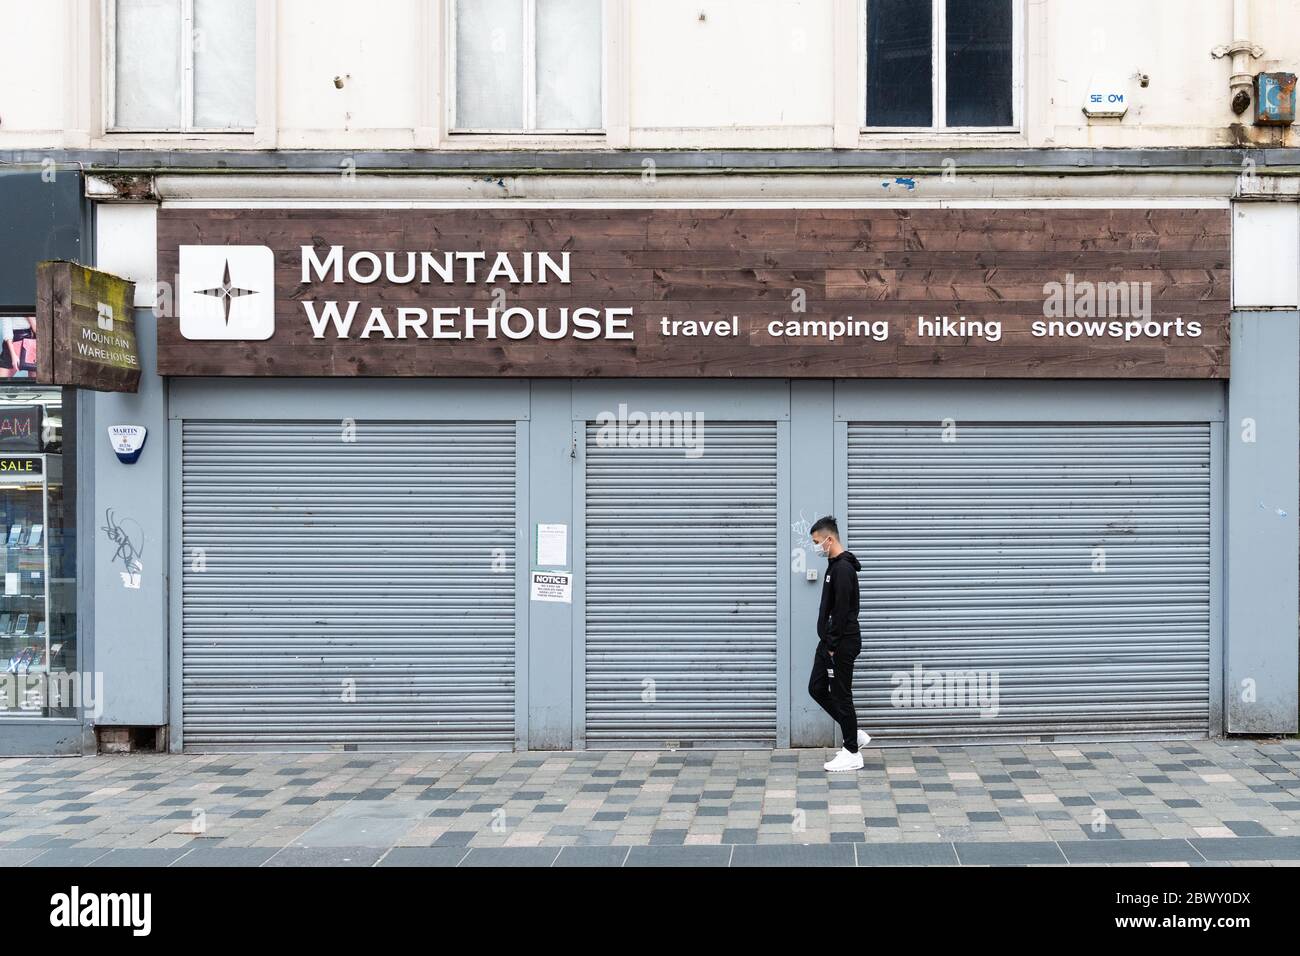 Mountain Warehouse - man wearing face mask walking by a closed and shuttered shop during the coronavirus pandemic lockdown, Glasgow, Scotland, UK Stock Photo